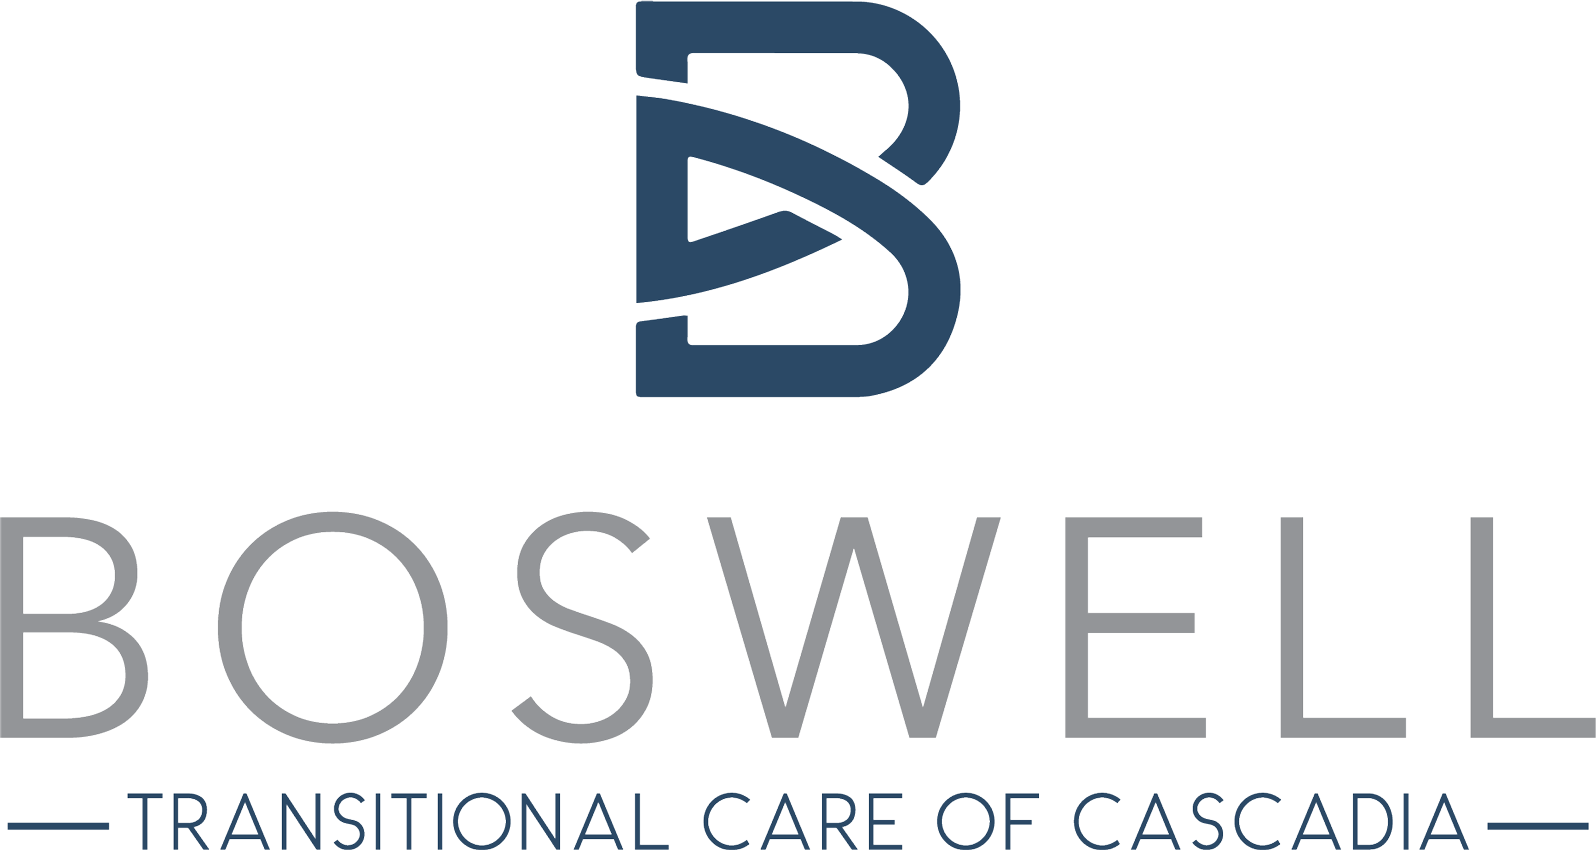 Boswell Transitional Care of Cascadia